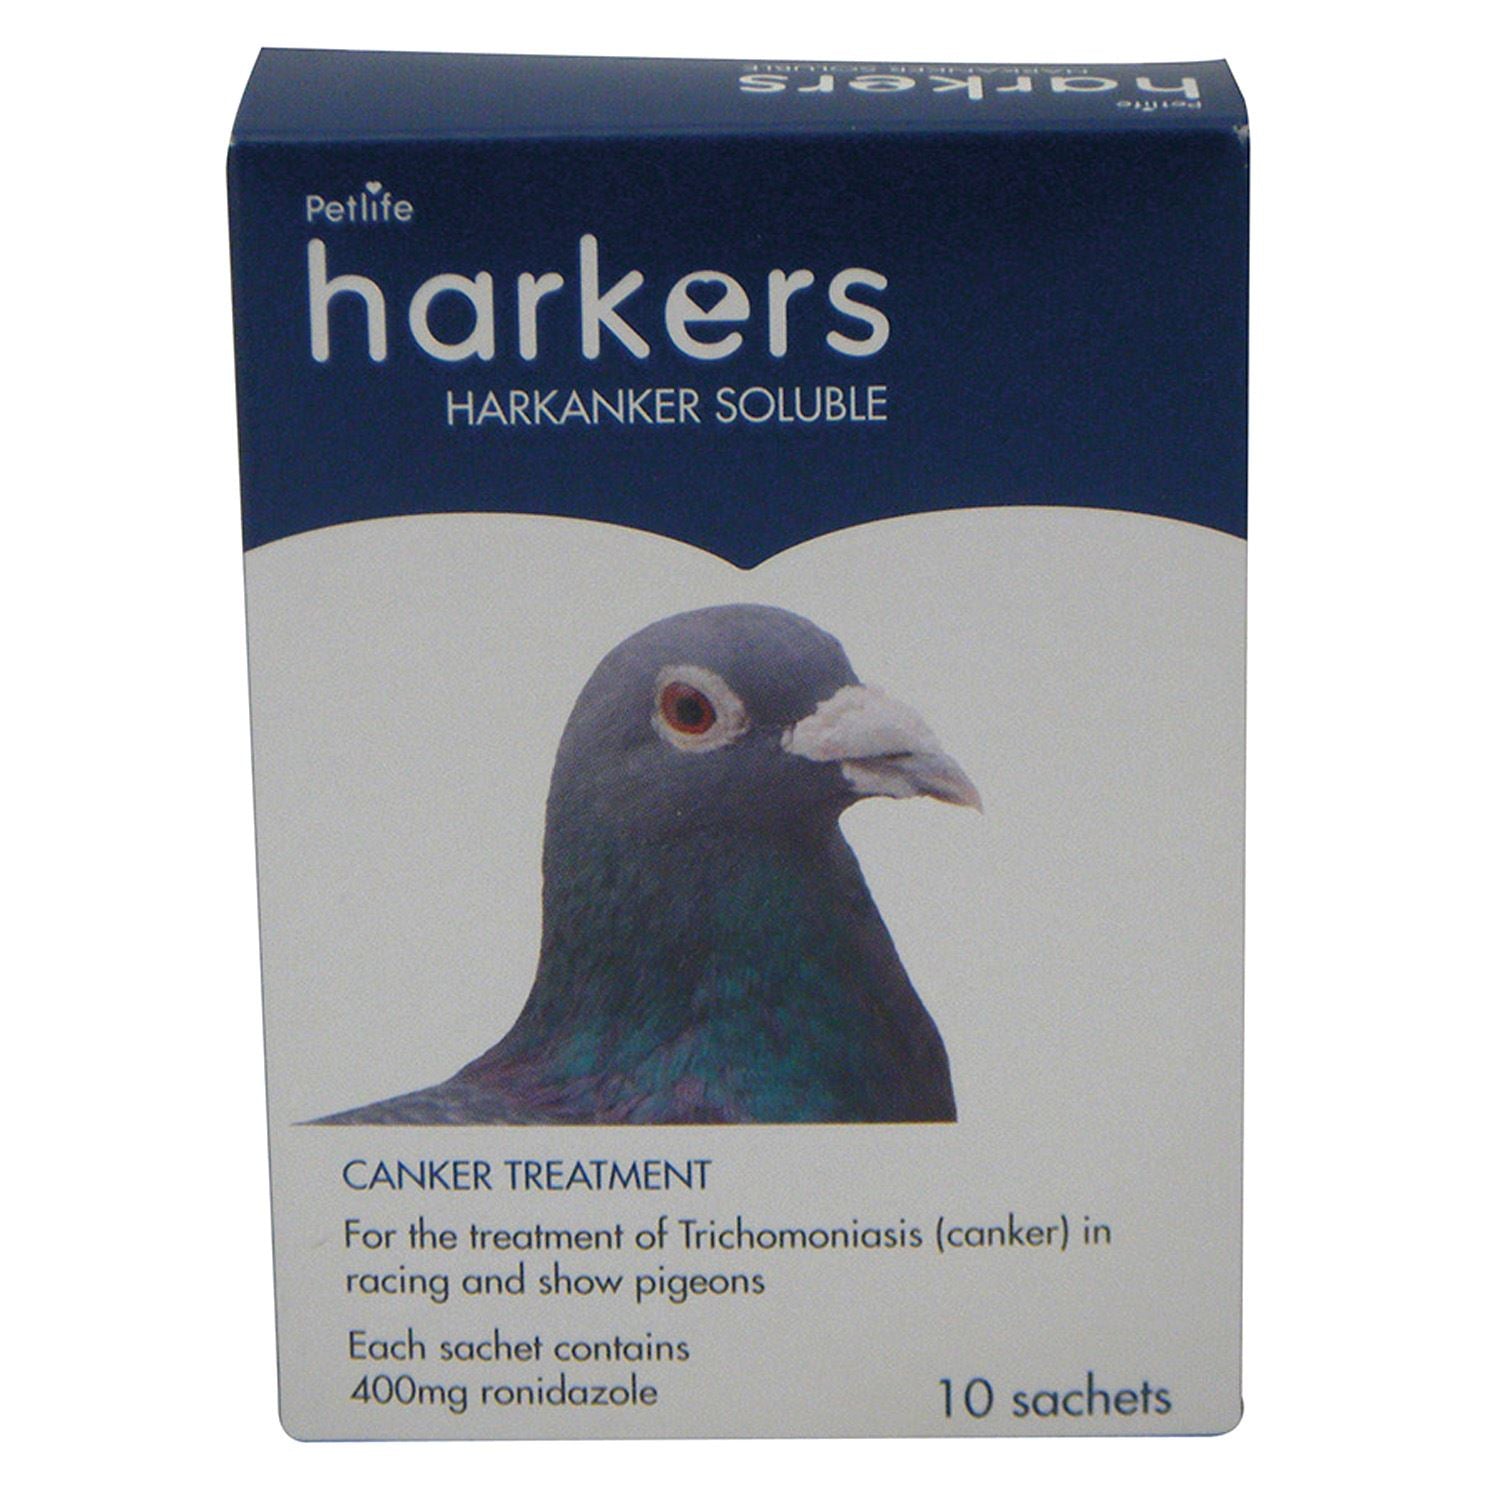 Harkers Harkanker Soluble - Just Horse Riders